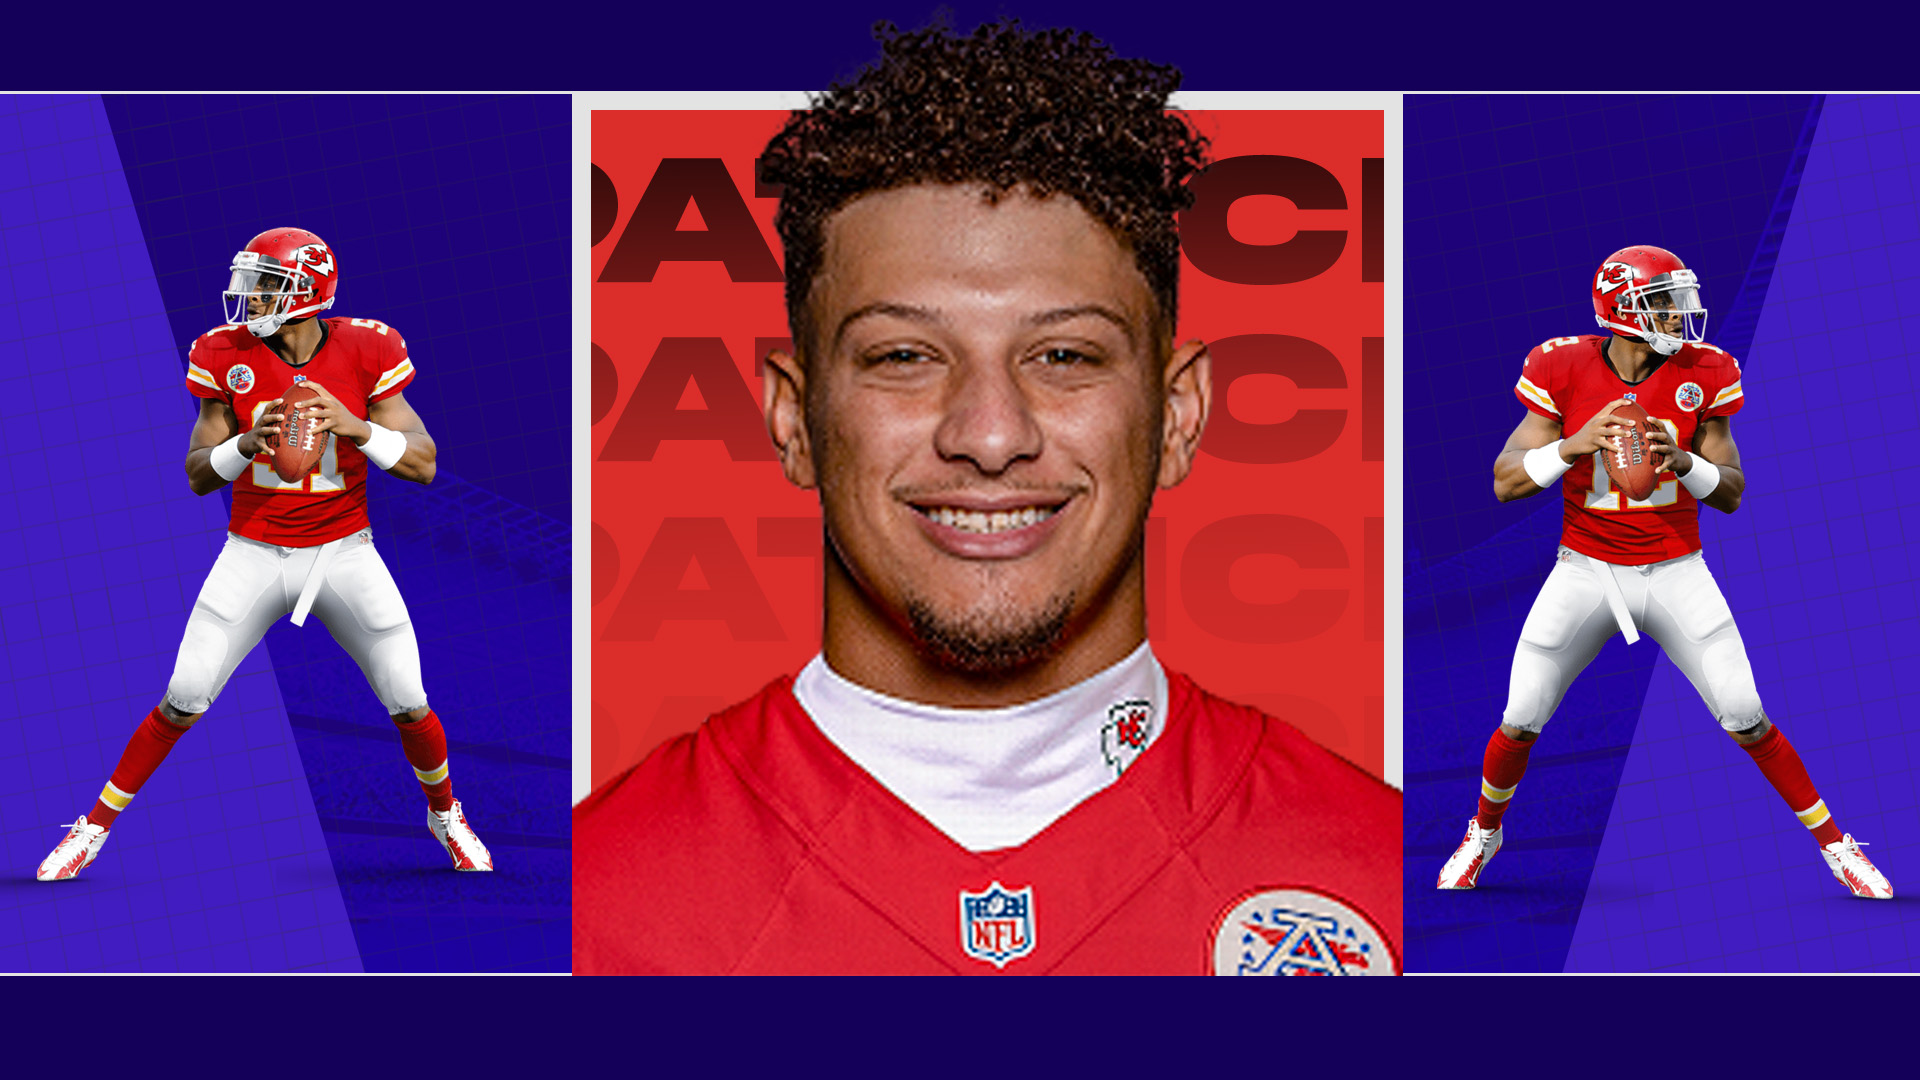 Patrick Mahomes’ Sponsors, brand endorsements, collaborations, net worth, investments, sponsorships, charity work